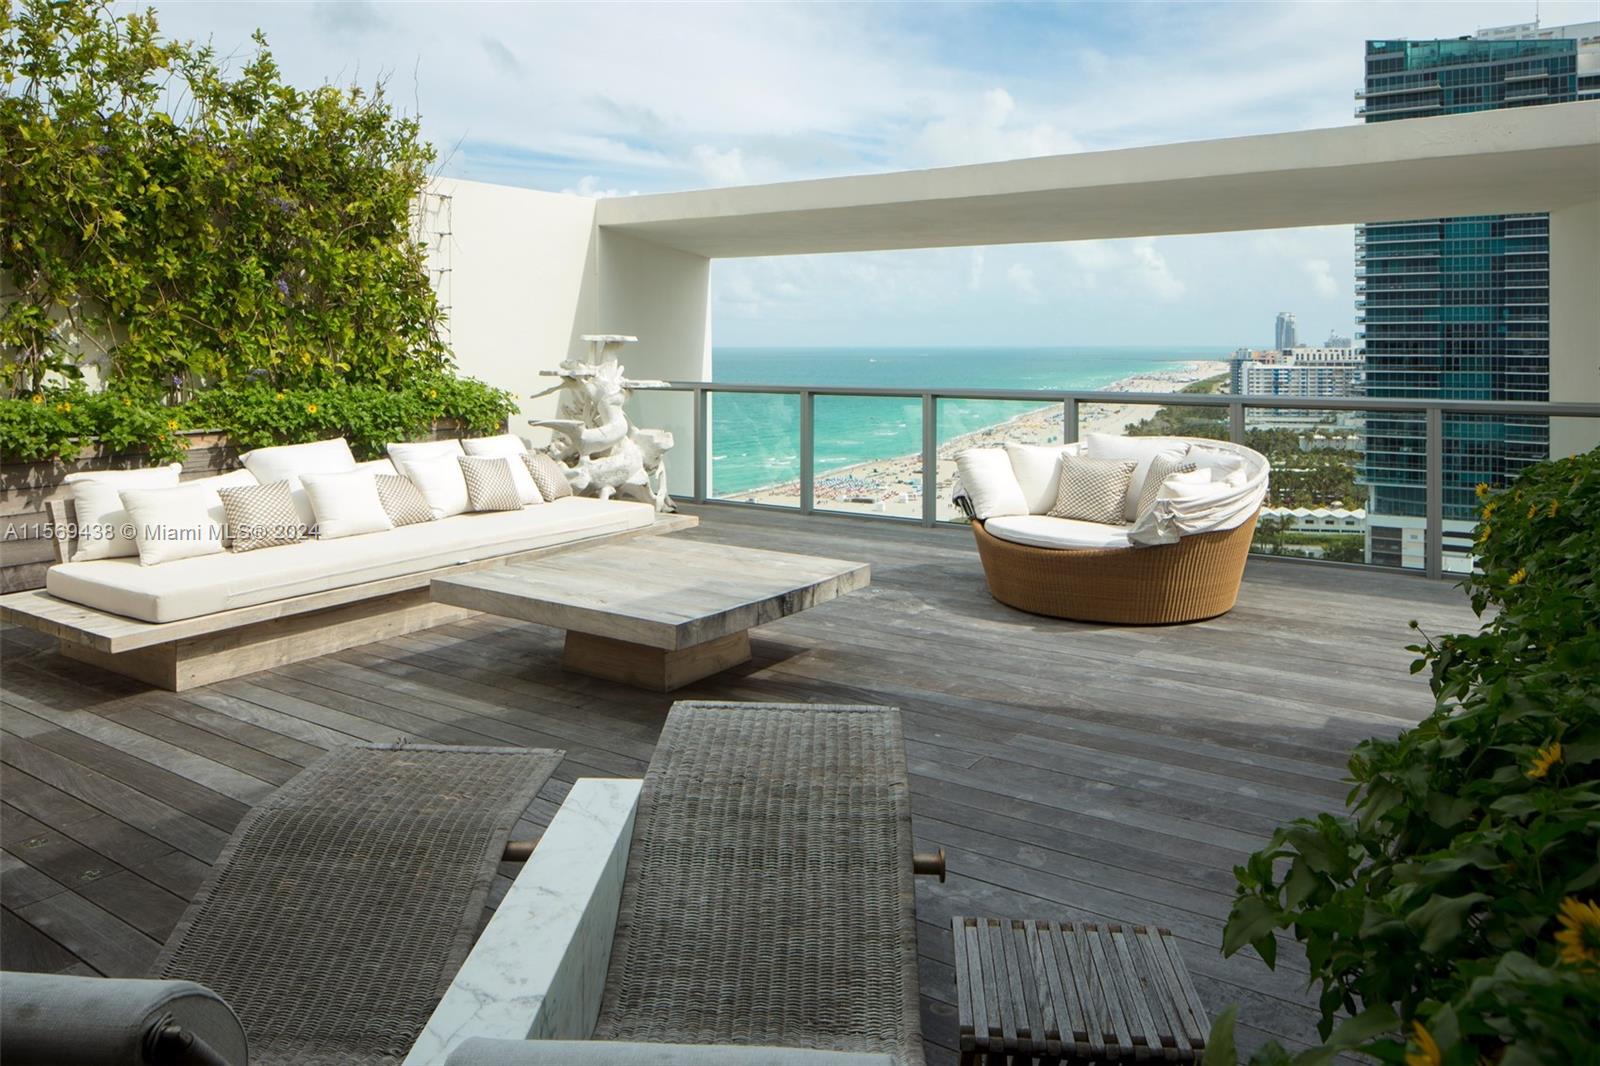 With 2314 Sq Ft of interior space and 2816 Sq Ft of exclusive outdoor space this split 2 bedroom/ 3 bath apartment has one of the best views in all of South Beach. Let's not forget the private rooftop pool, the carefully curated interior design, the furniture that comes with the unit and a convenient split floor plan. Competitively priced, this unique penthouse performs very well in the W hotel rental program.